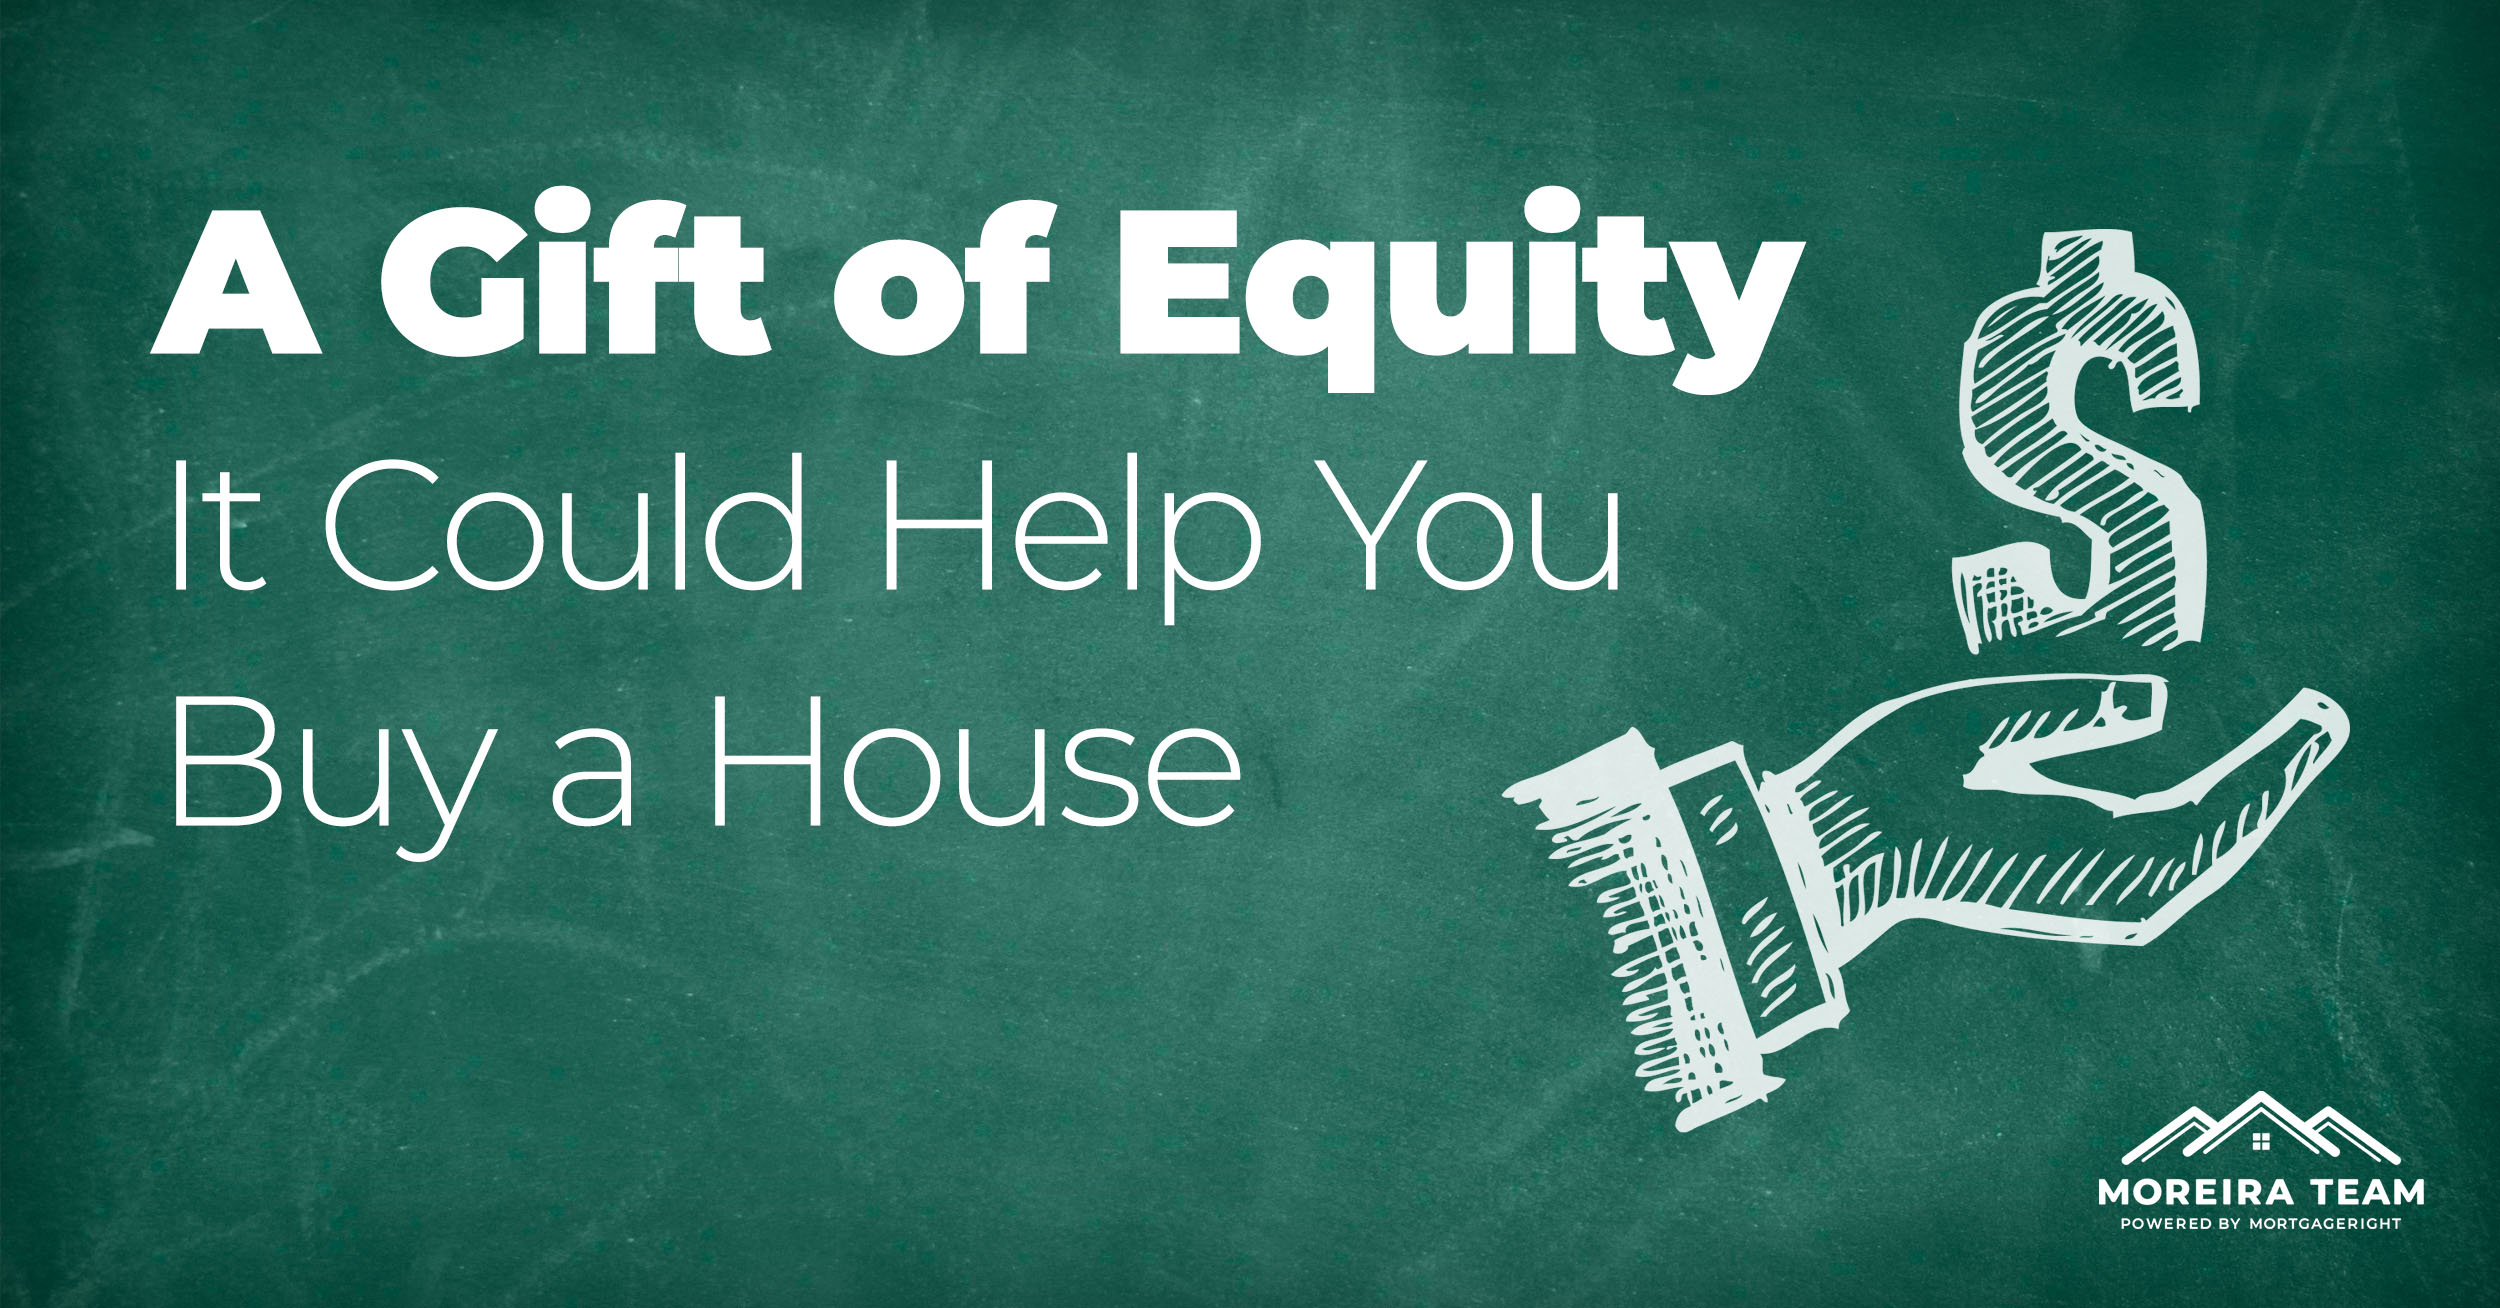 A gift of equity could help you buy a house